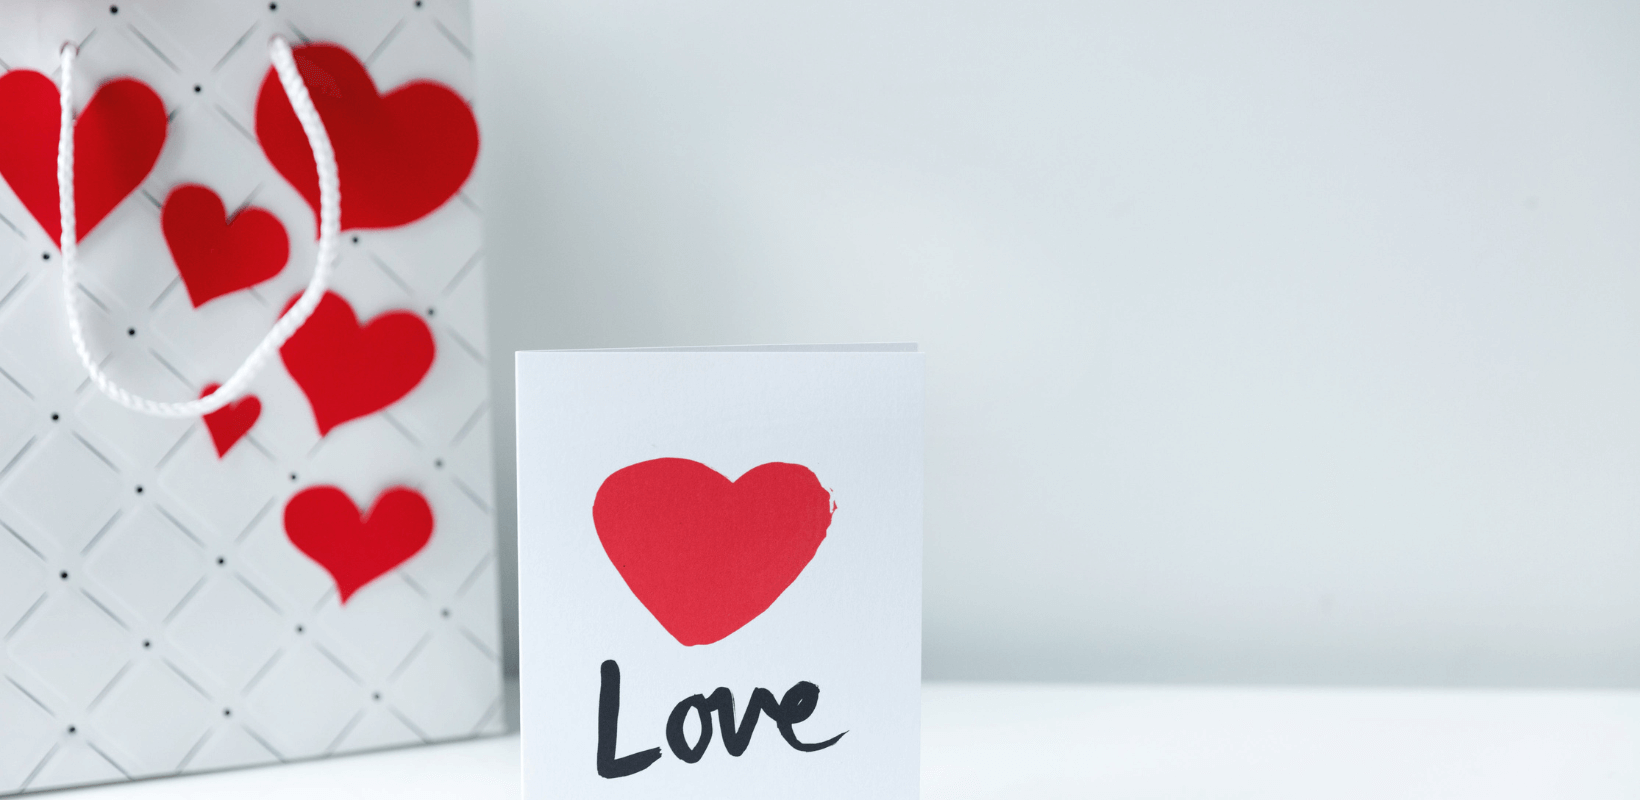 7 Strategies To Leverage In Mobile Marketing For Valentine’s Day This Year